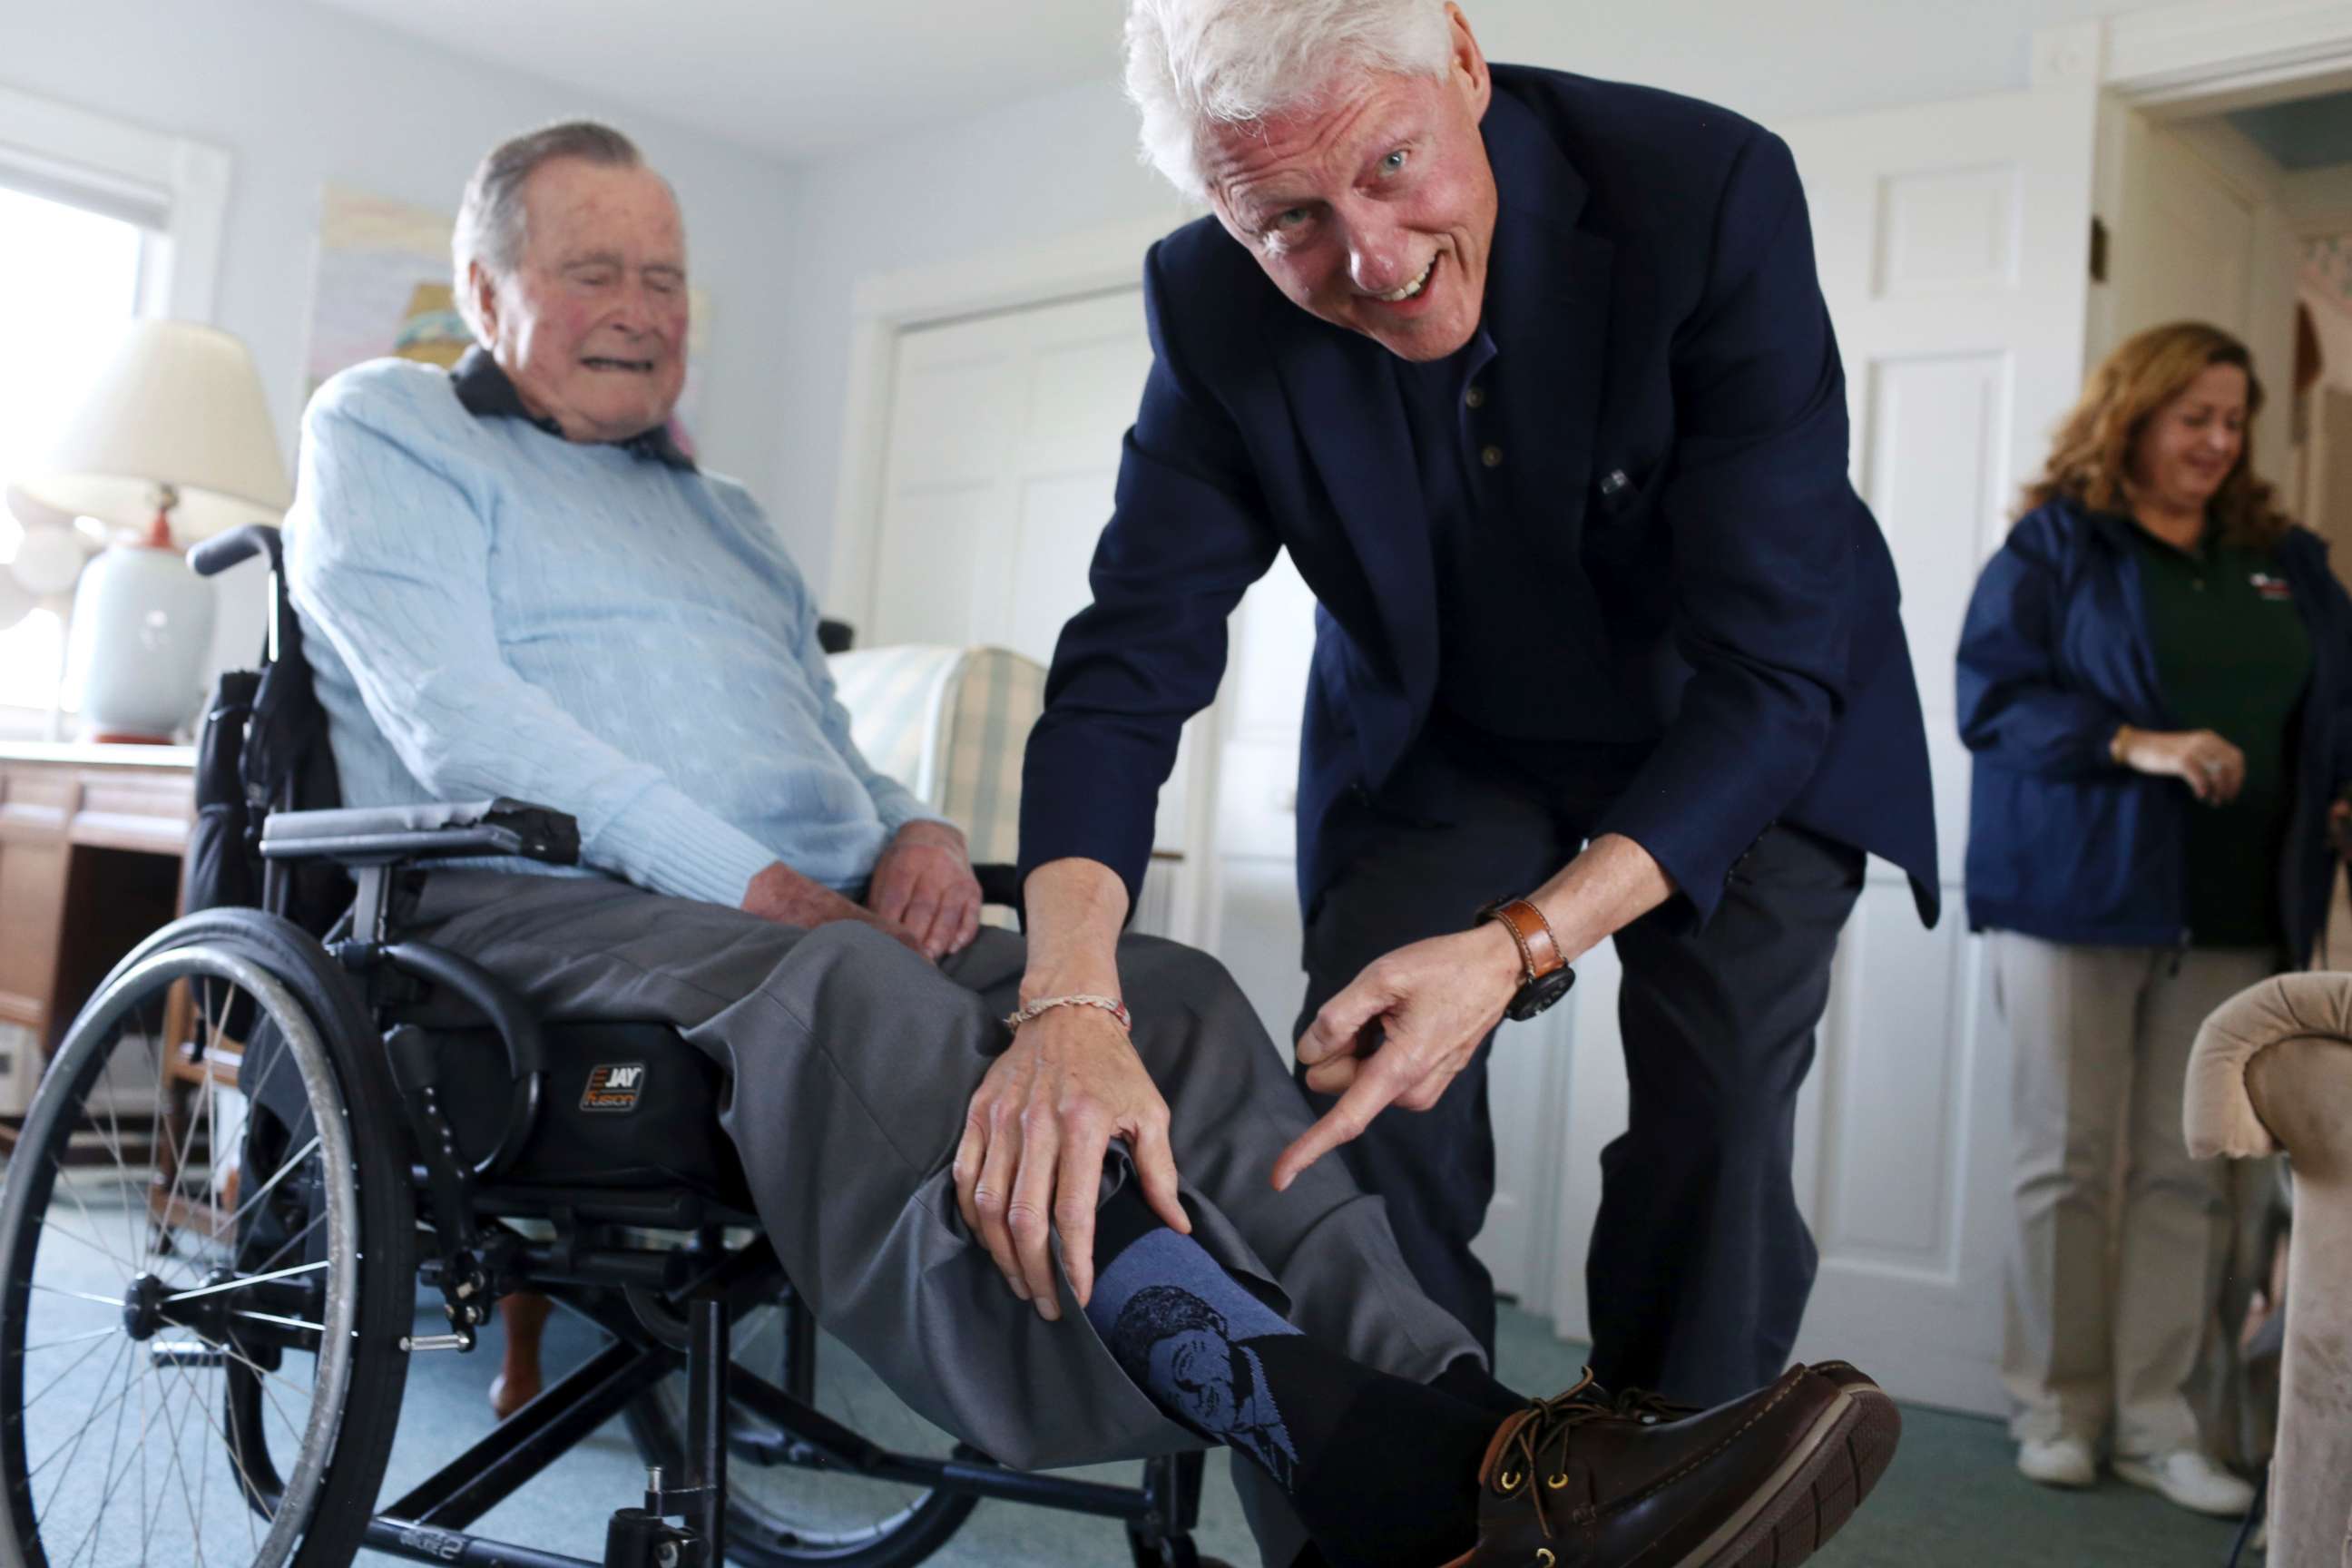 PHOTO: Former President Bill Clinton jokes with former President George H.W. Bush, as Bush shows off a pair of "Bill Clinton socks," while Clinton visits Bush at his home in Kennebunkport, Maine, June 25, 2018.